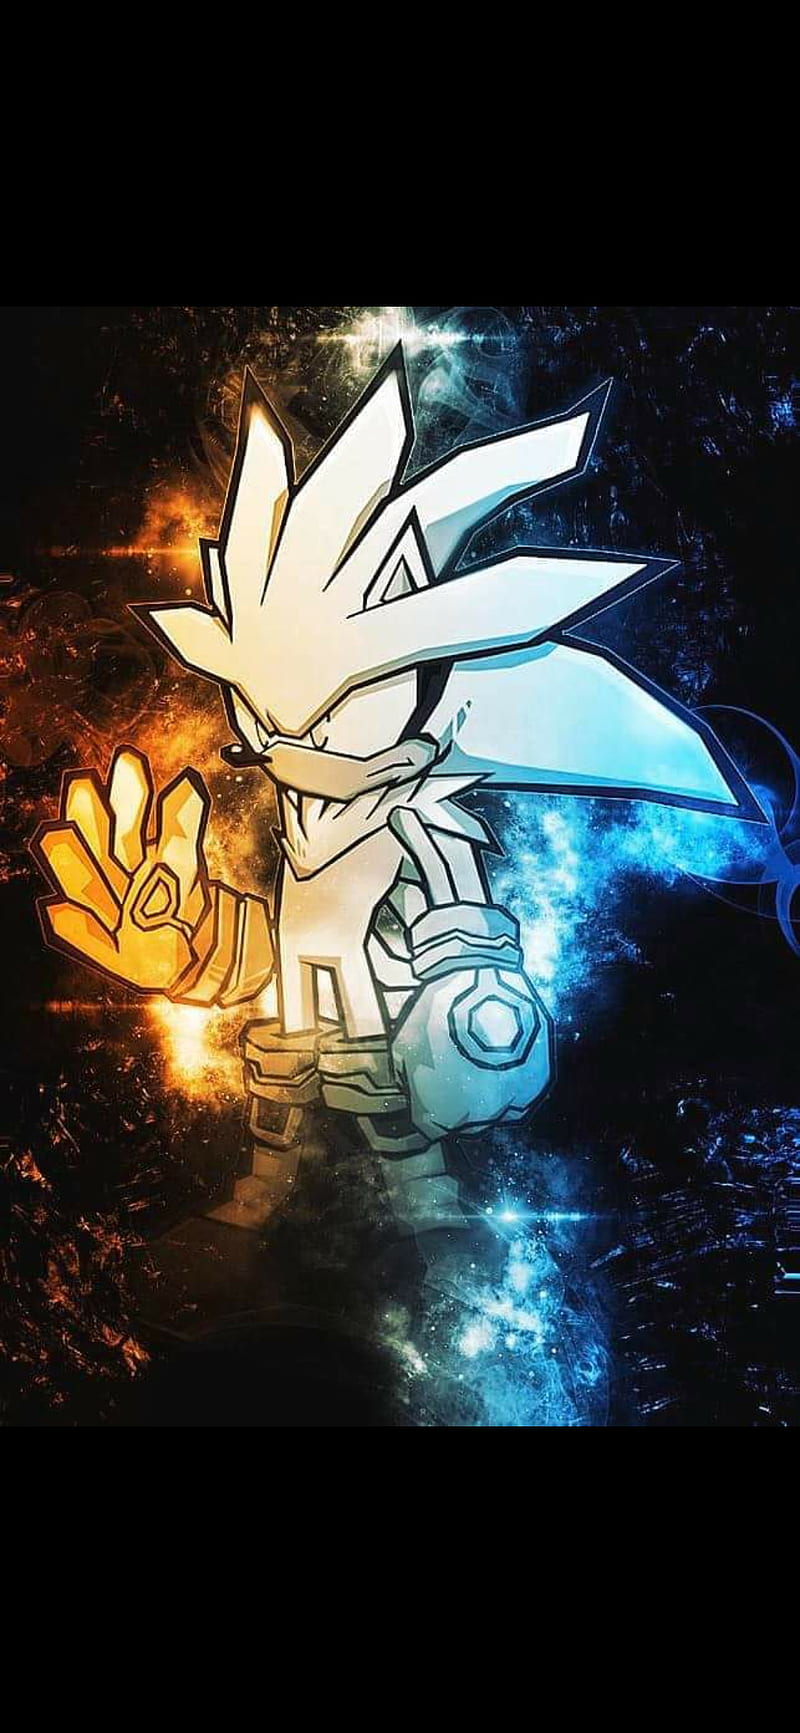 Download Silver The Hedgehog wallpapers for mobile phone free Silver  The Hedgehog HD pictures